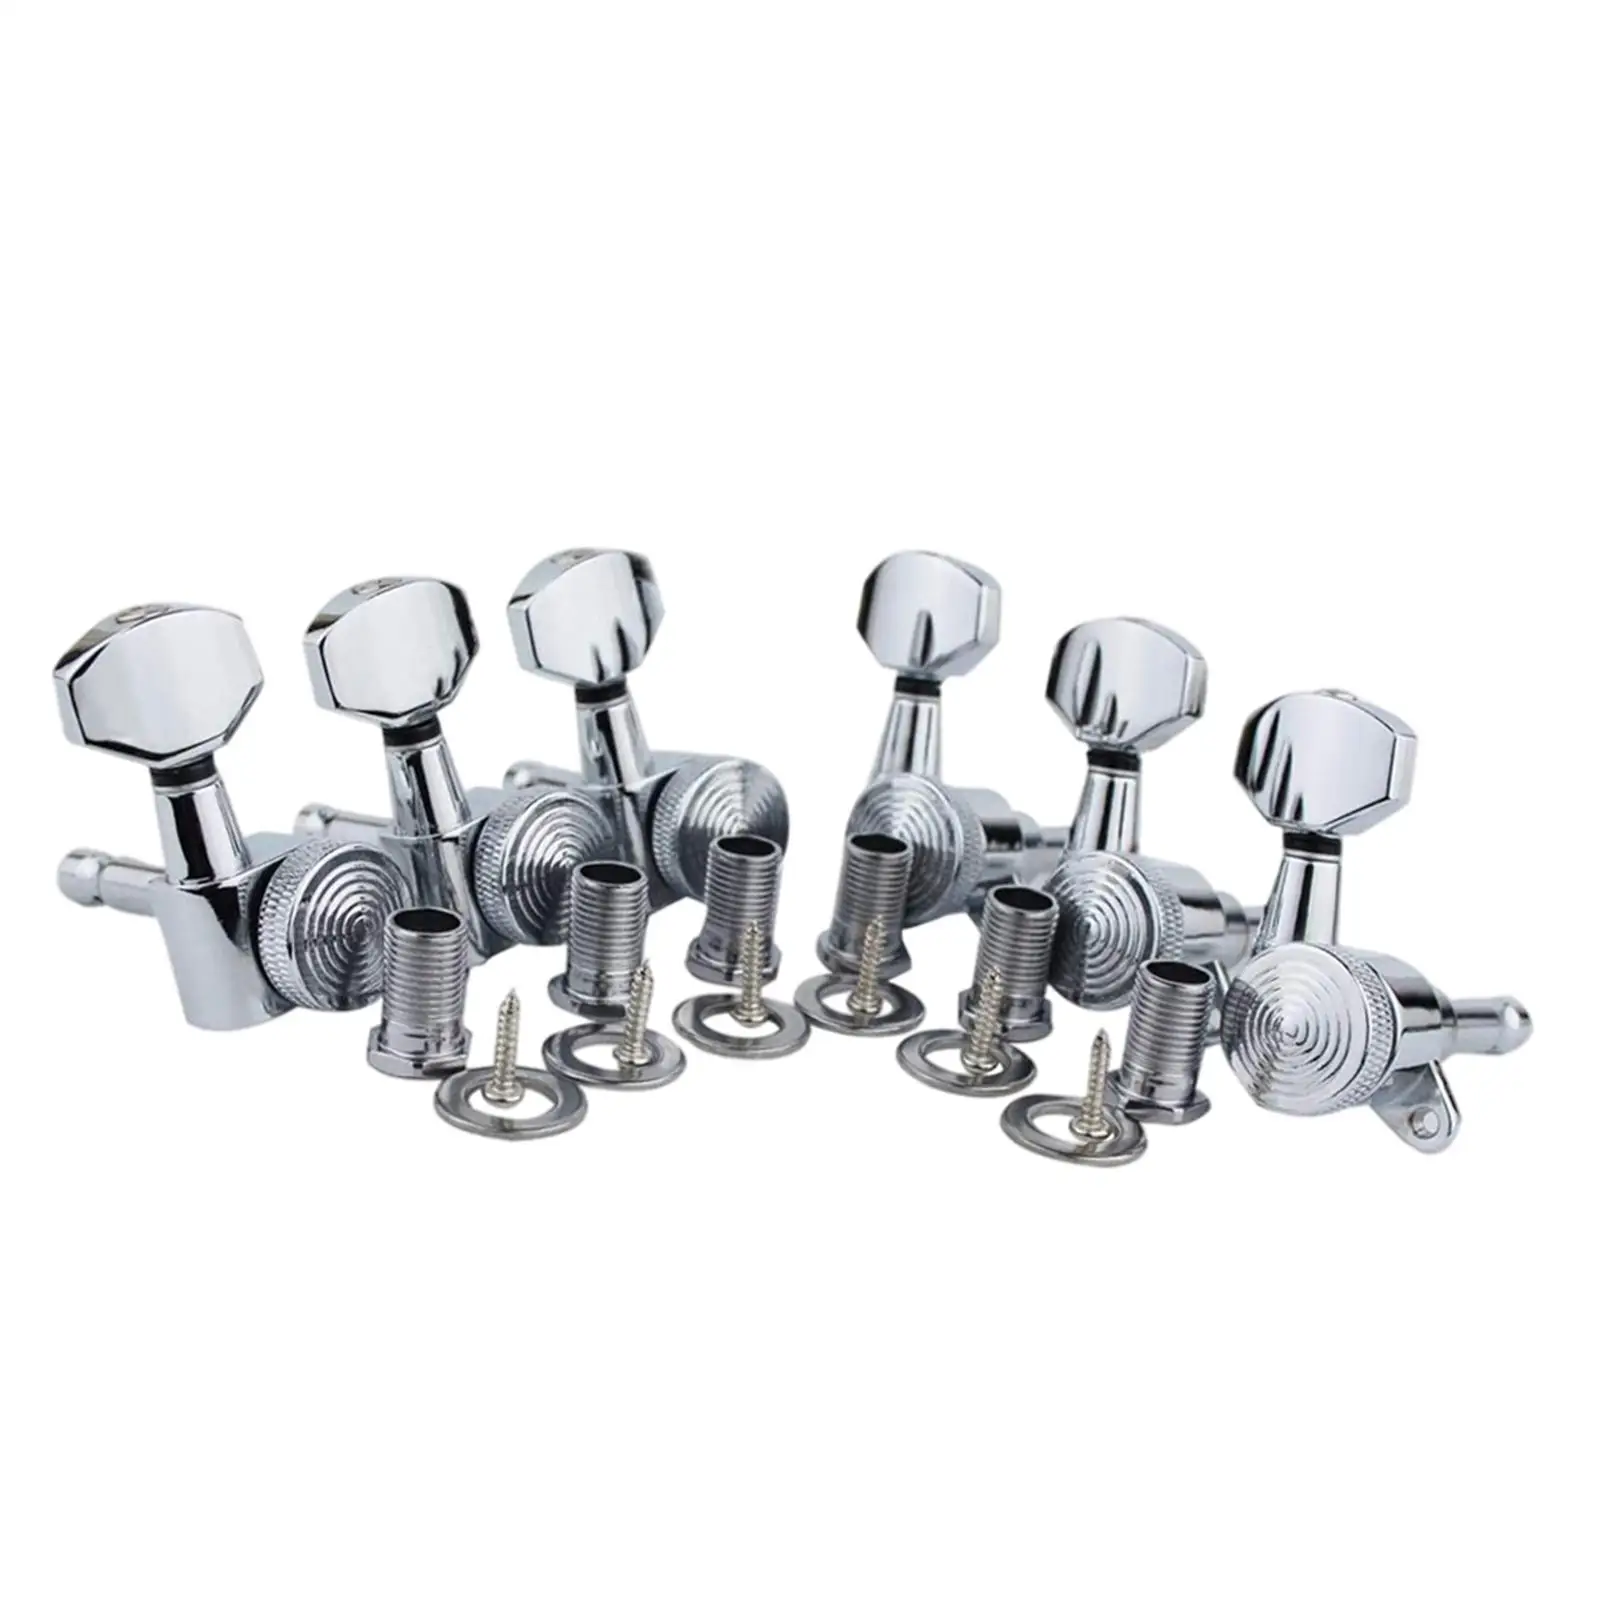 6/Set Locking Guitar Tuners Gear Ratio 1:18 Knobs Tuning Keys 10mm Headstock Holes Wear-Resistant for Electric Guitars Chrome